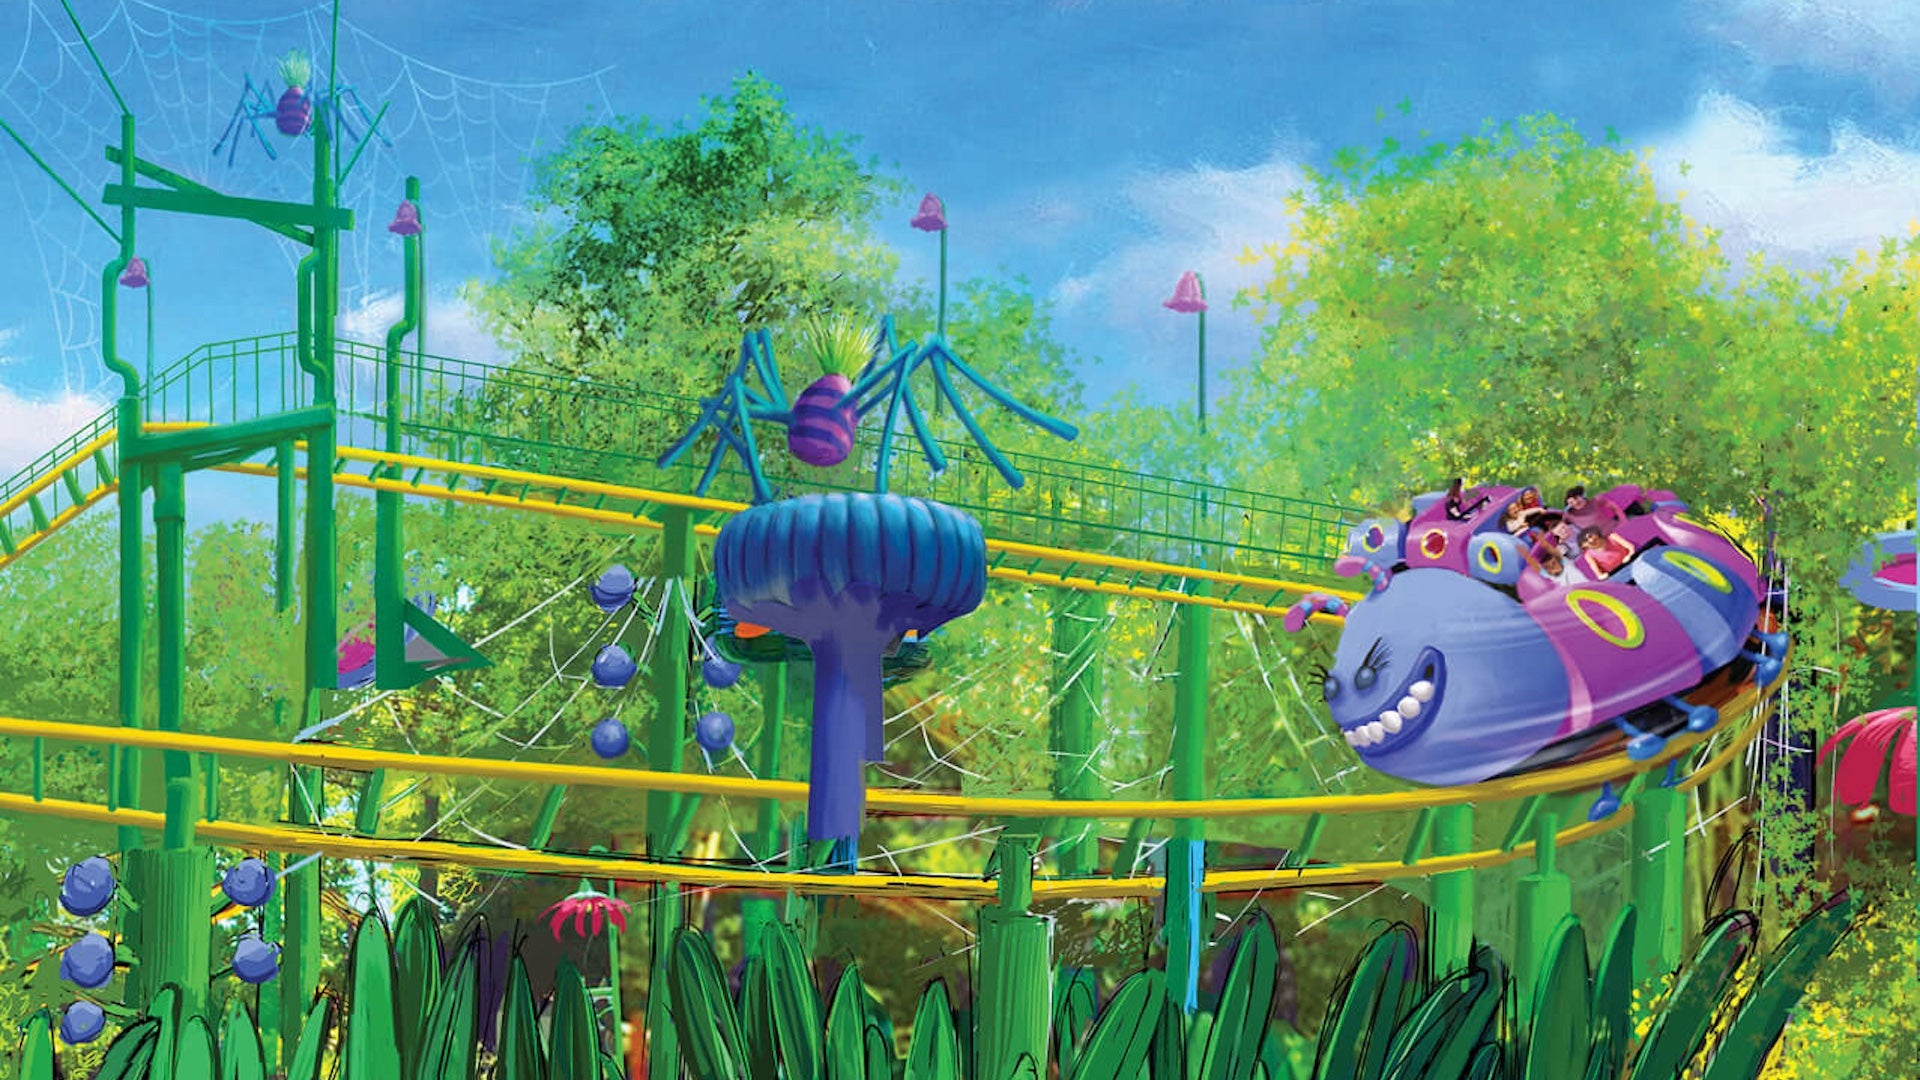 Artist rendering of the Trolls roller coaster at Dreamworks at Universal Orlando